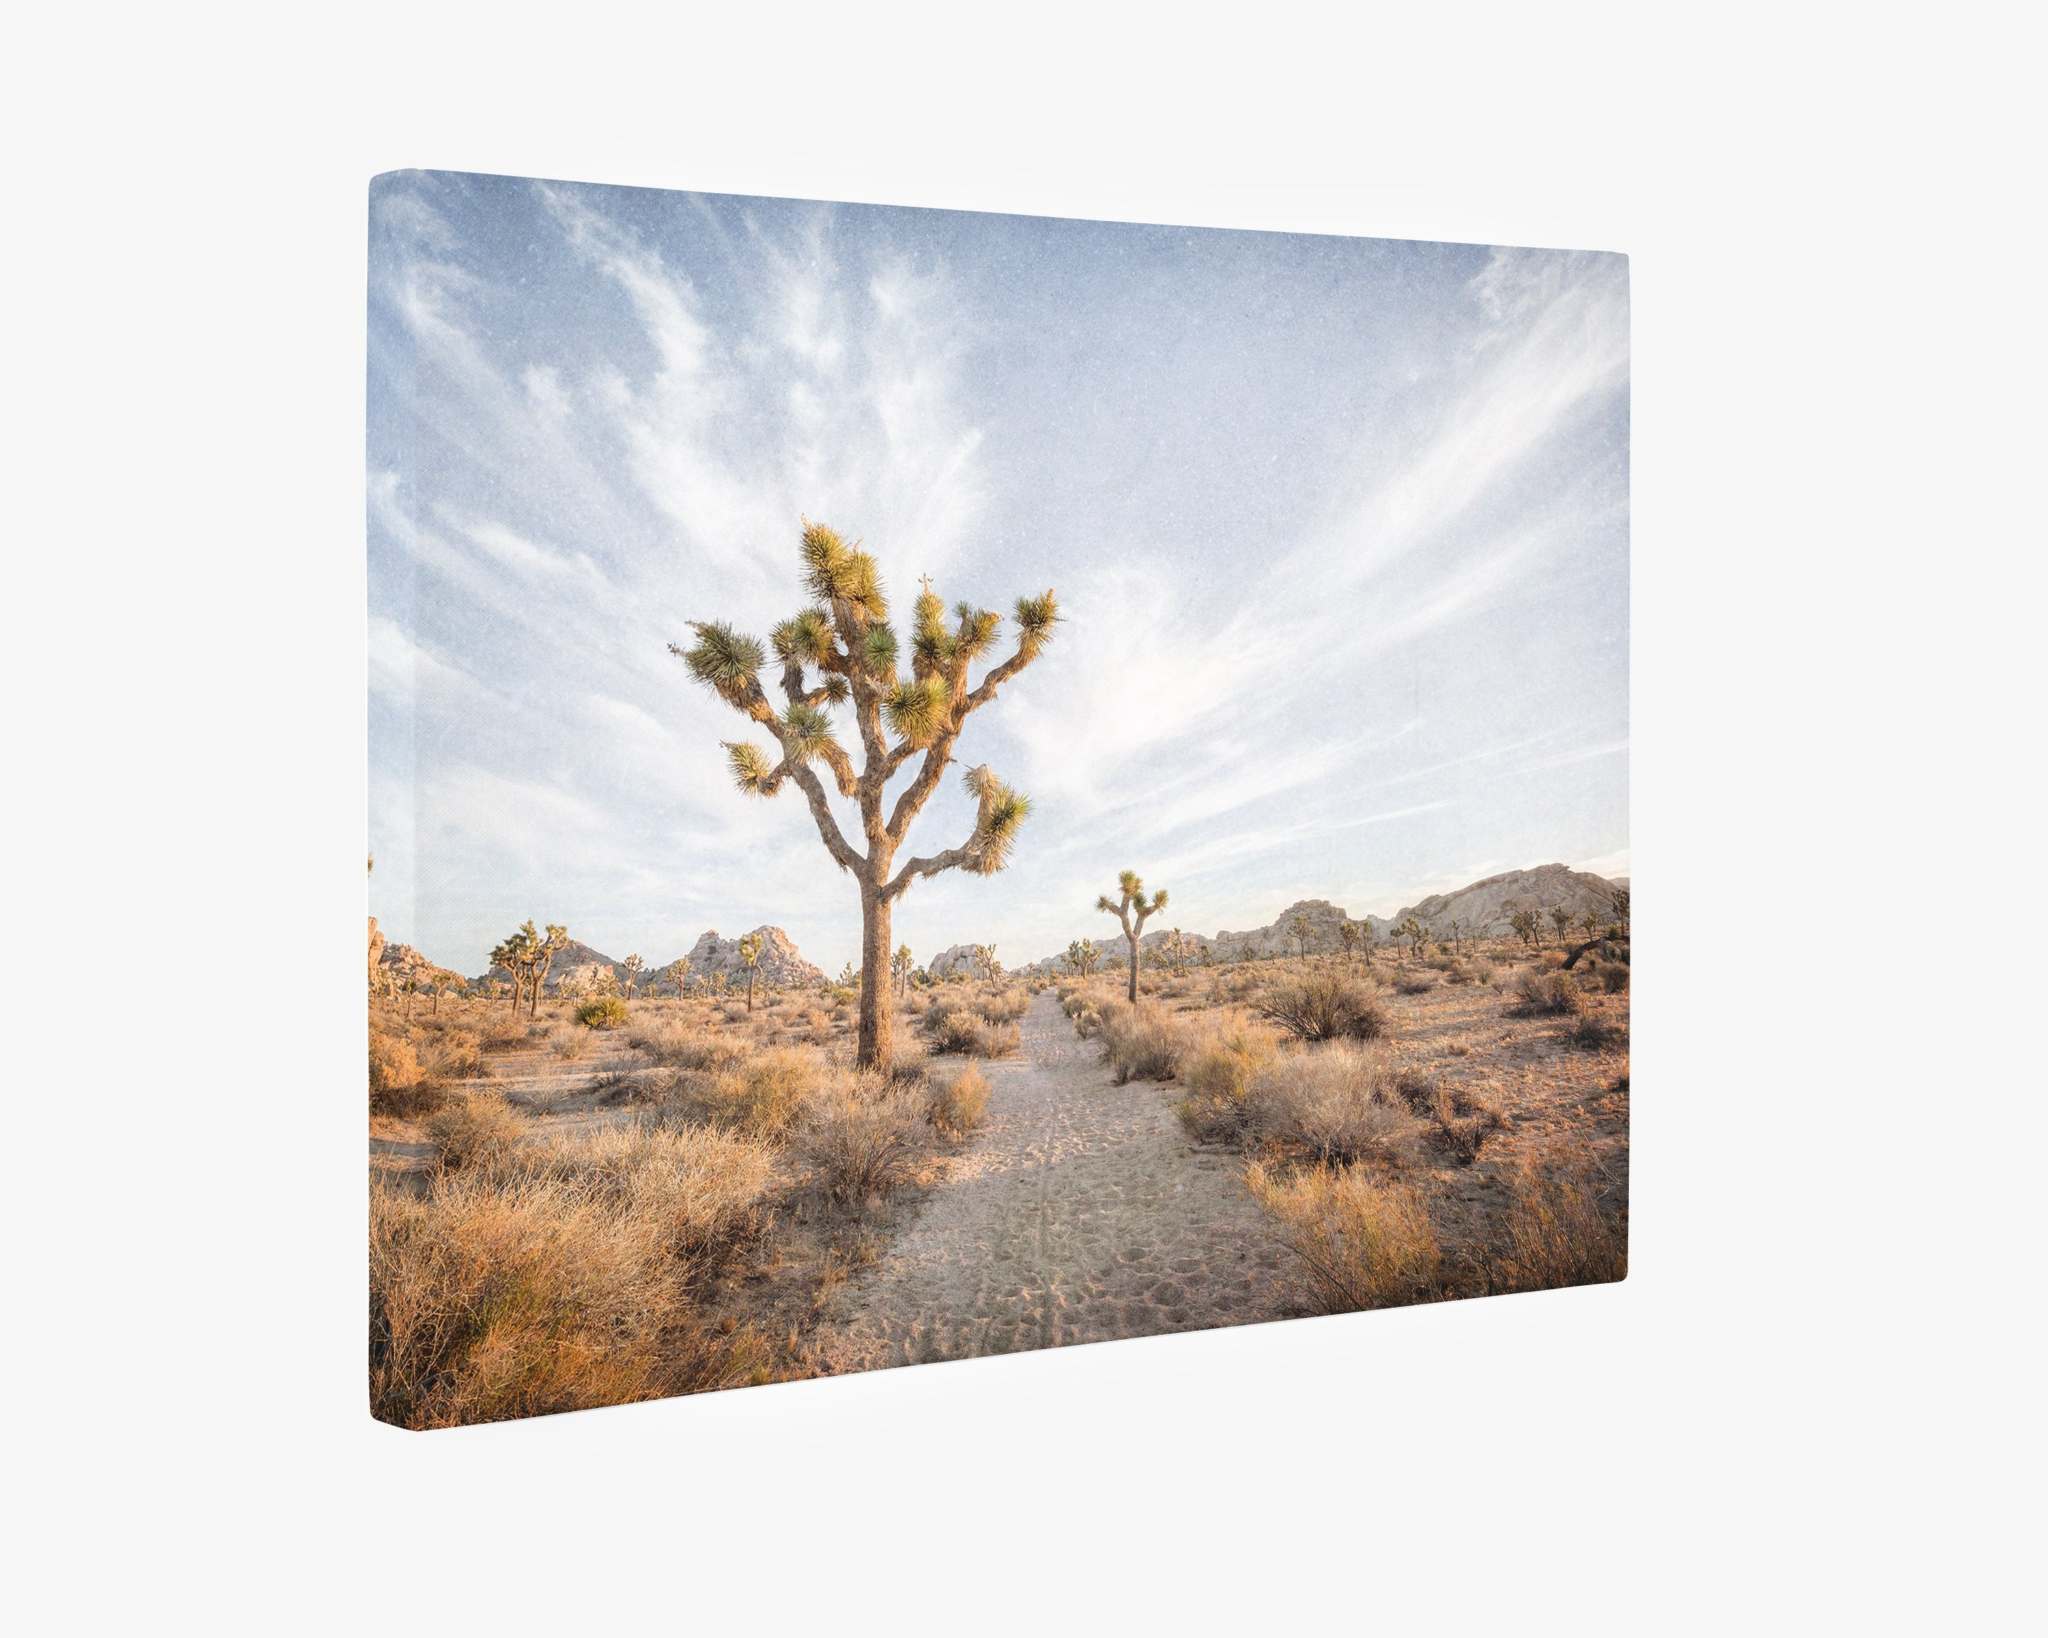 An Offley Green Joshua Tree Canvas Wall Art, 'Path to Joshua,' showcasing a serene desert landscape from Joshua Tree National Park, with a prominent Joshua tree in the center. The sky is blue with wispy clouds, and the ground has sparse vegetation and sandy paths, creating a peaceful, natural scene reminiscent of Palm Springs.